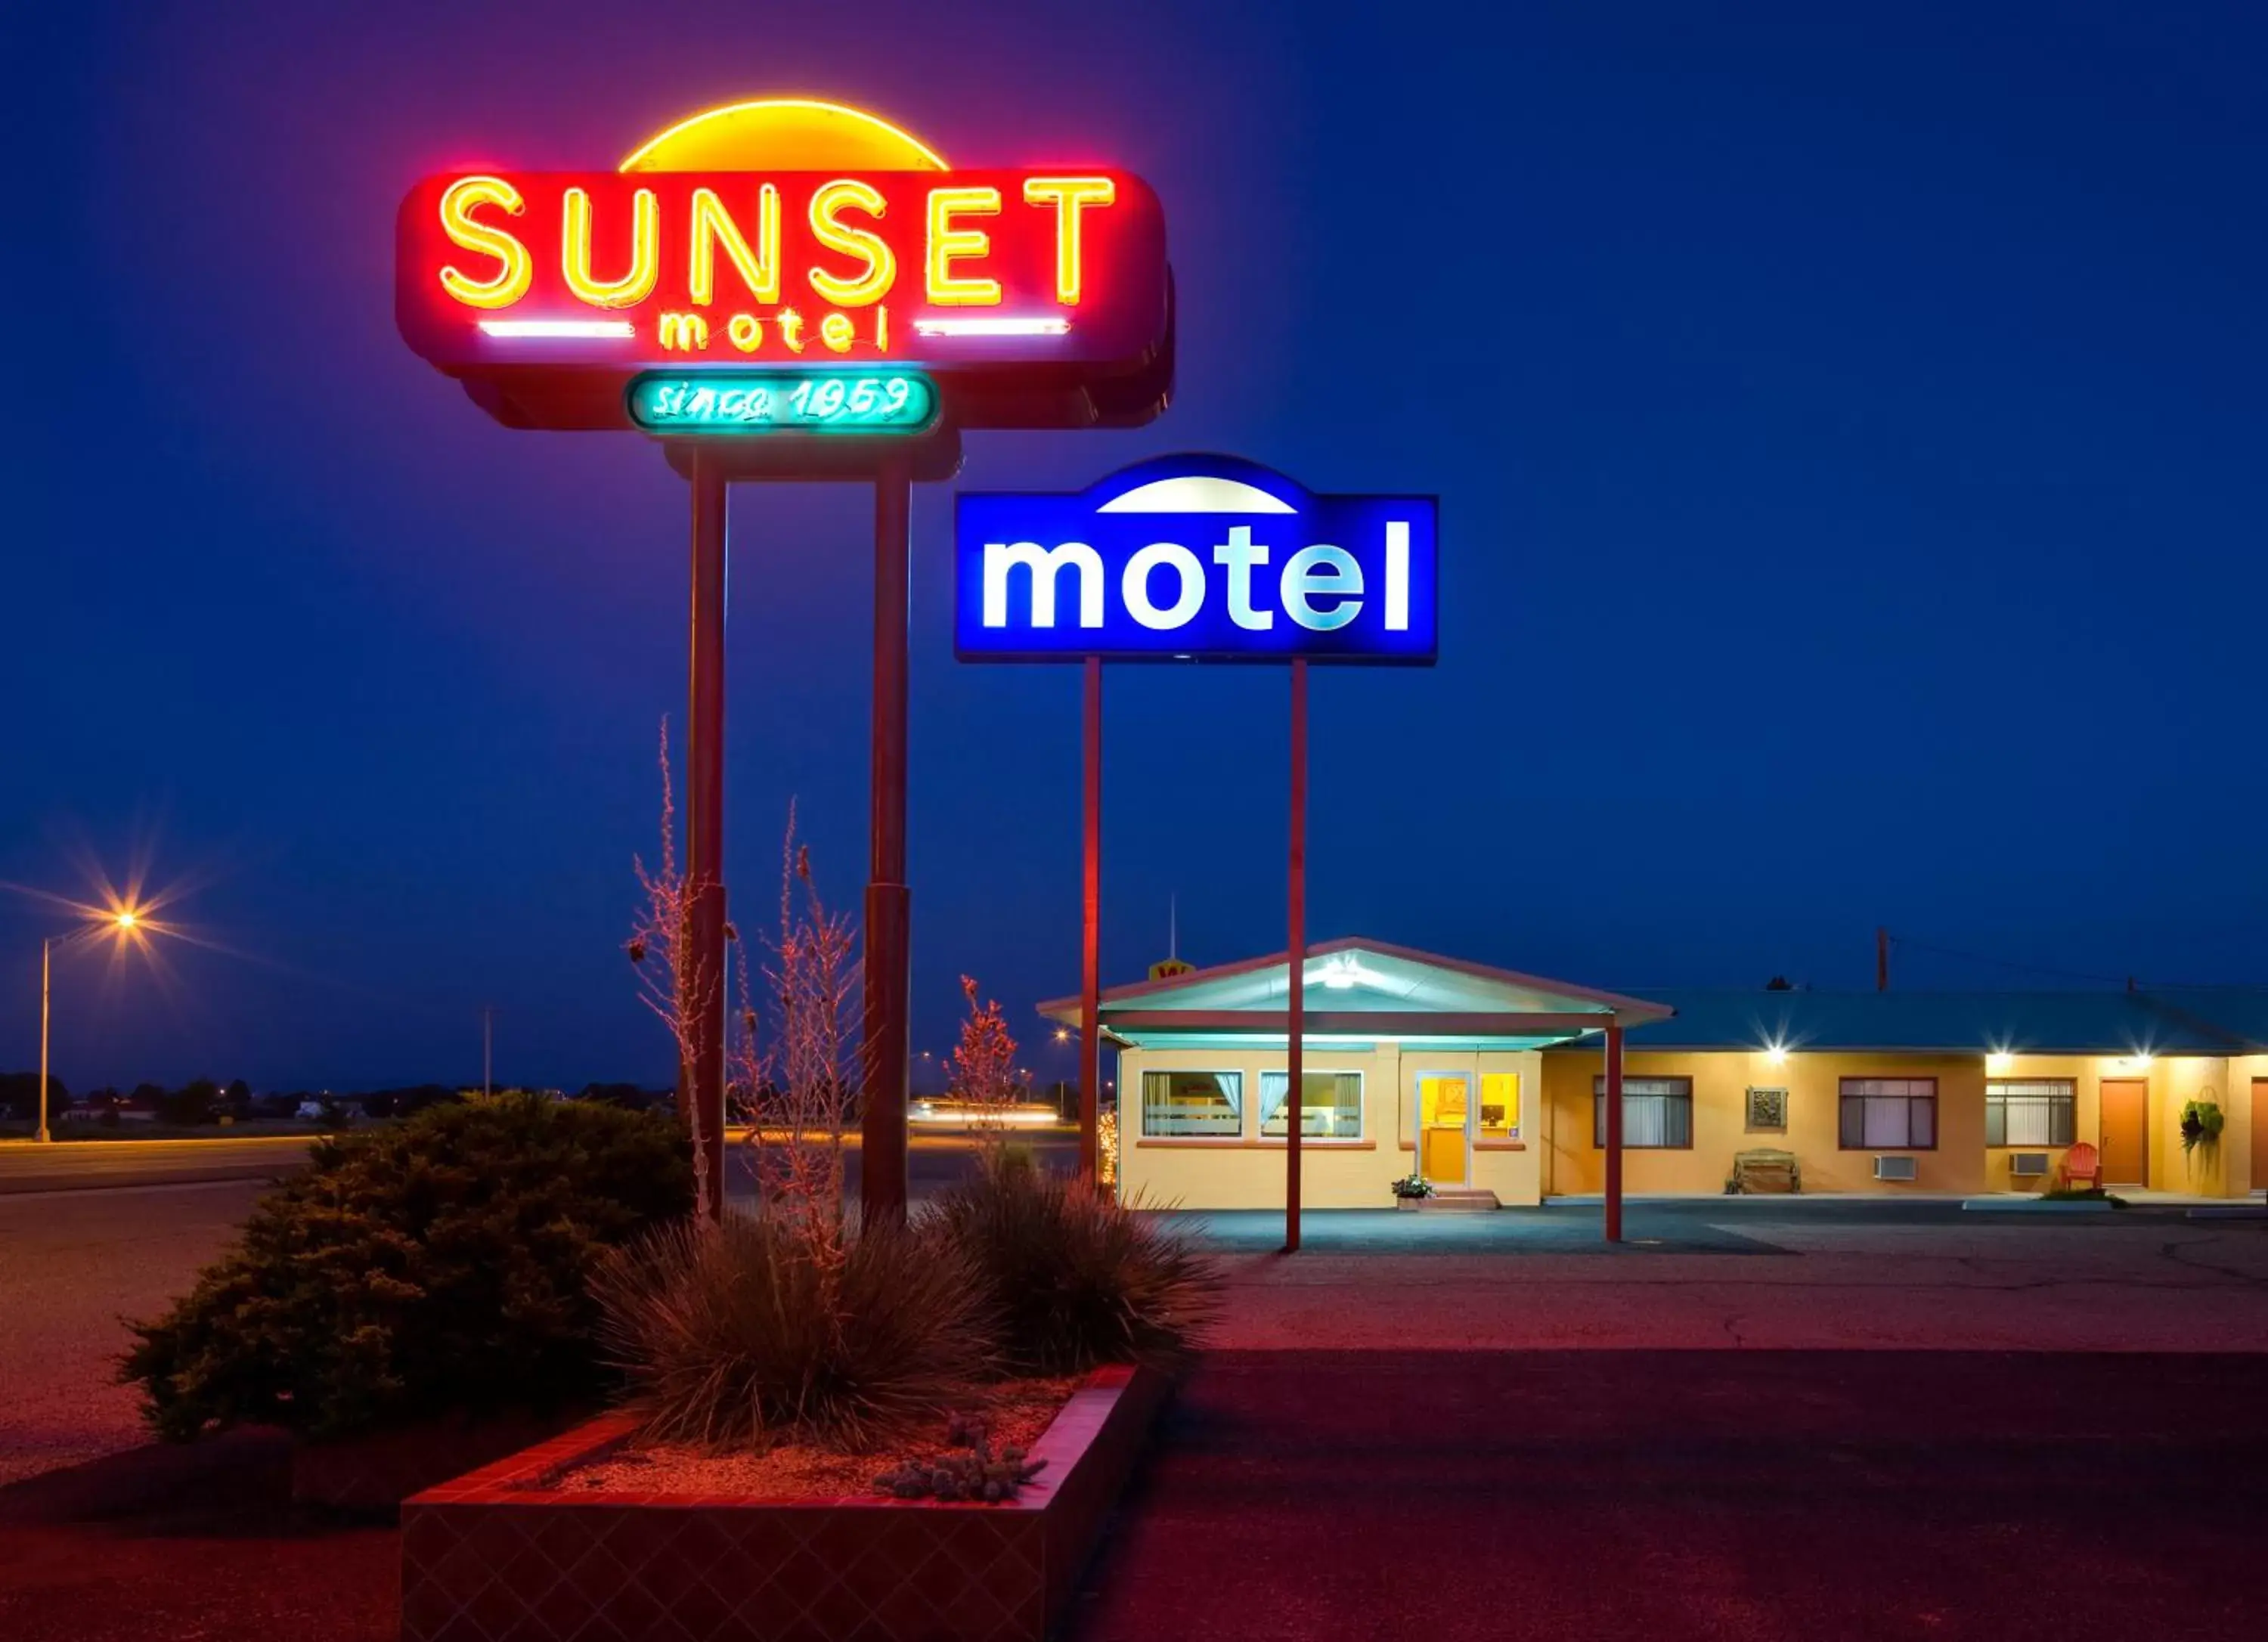 Street view, Property Building in Sunset Motel Moriarty